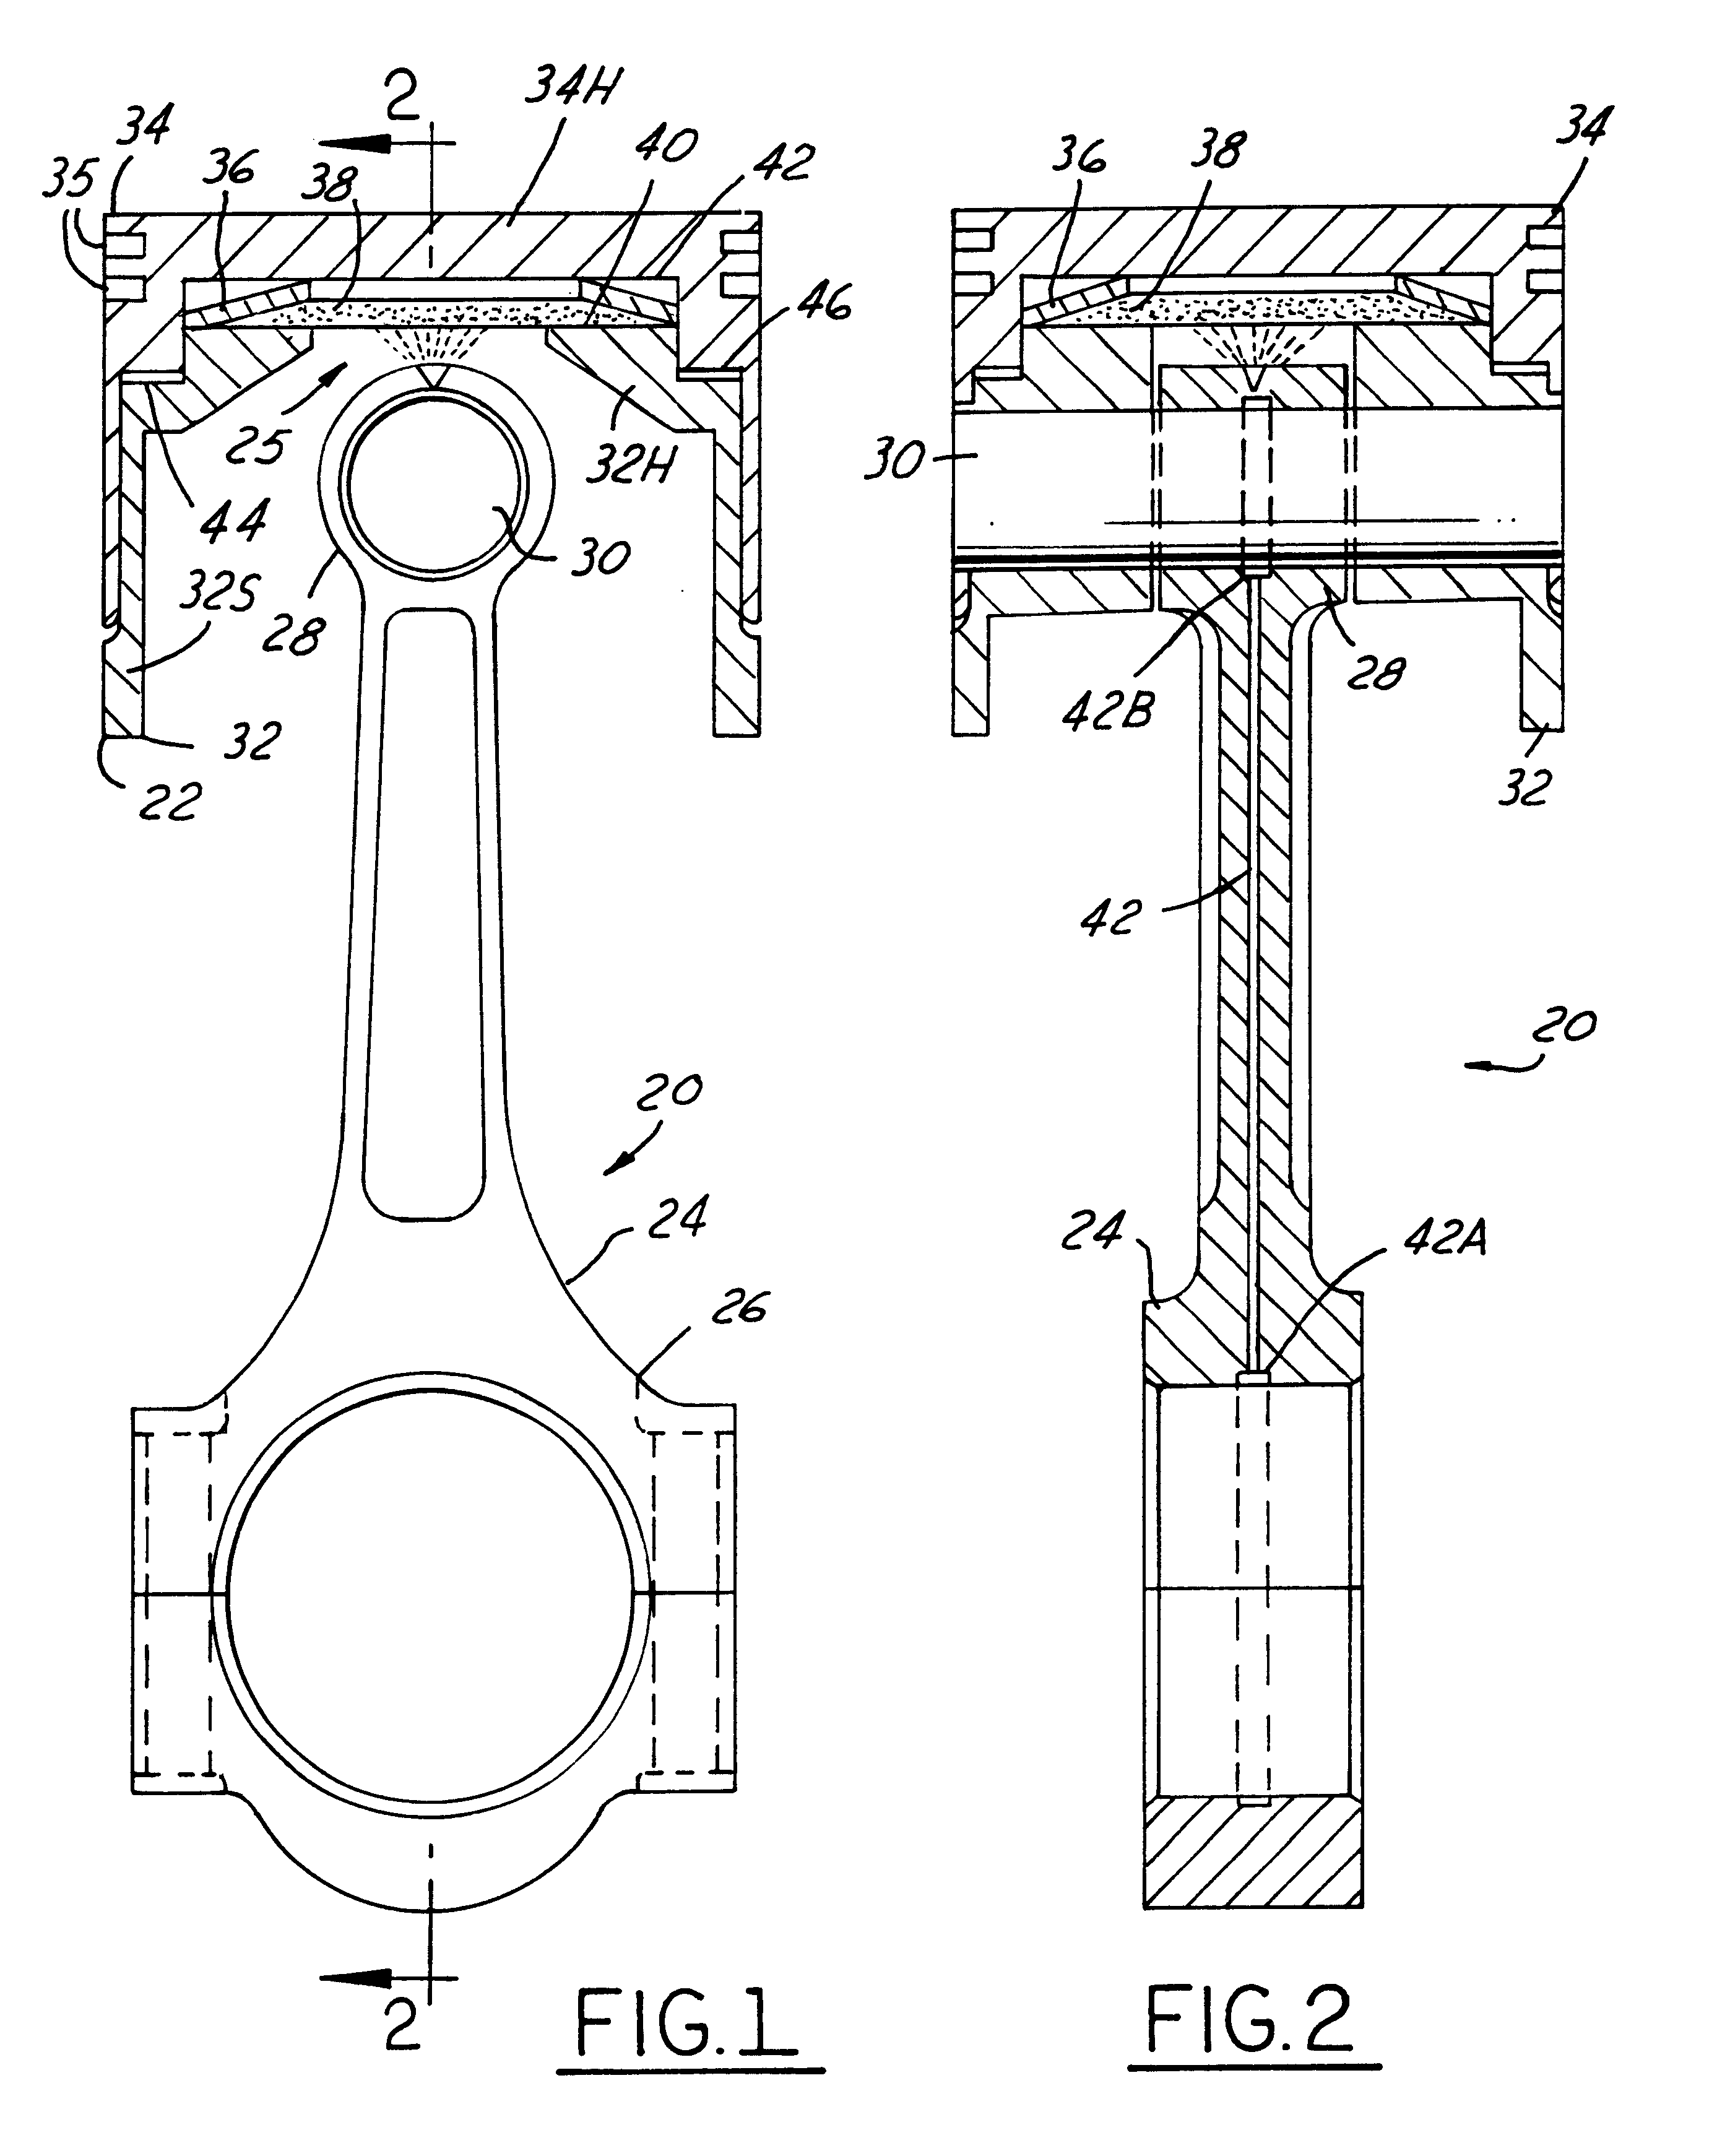 Variable compression ratio pistons and connecting rods